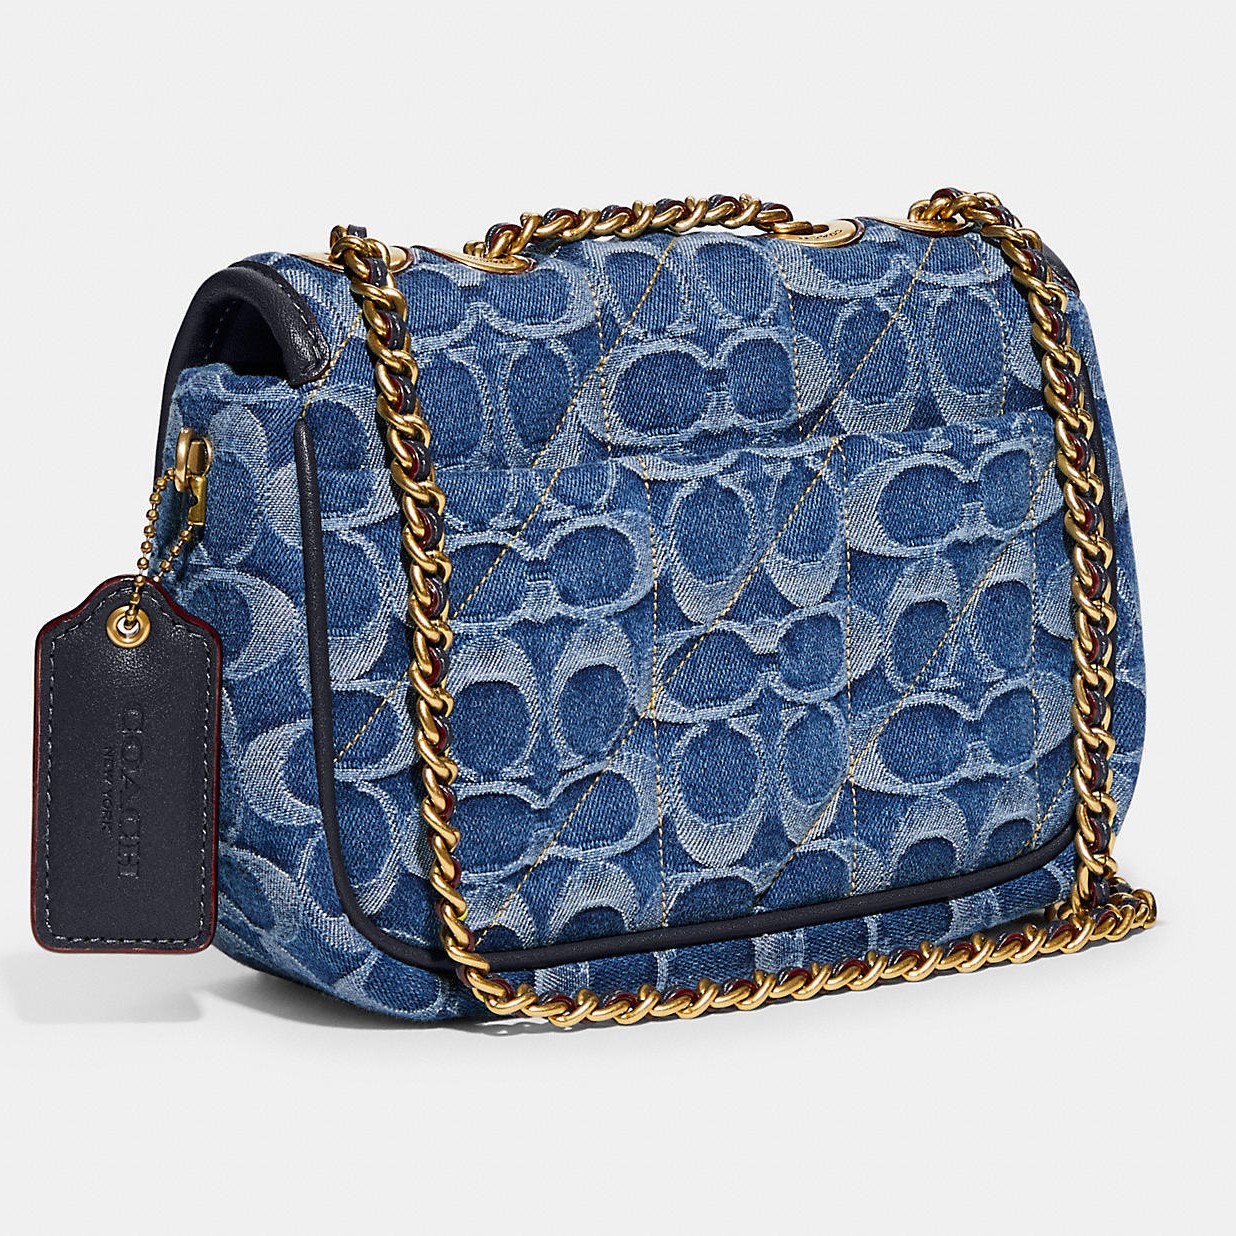 TÚI NỮ COACH PILLOW MADISON SHOULDER BAG 18 IN SIGNAUTURE DENIM WITH QUILTING 2